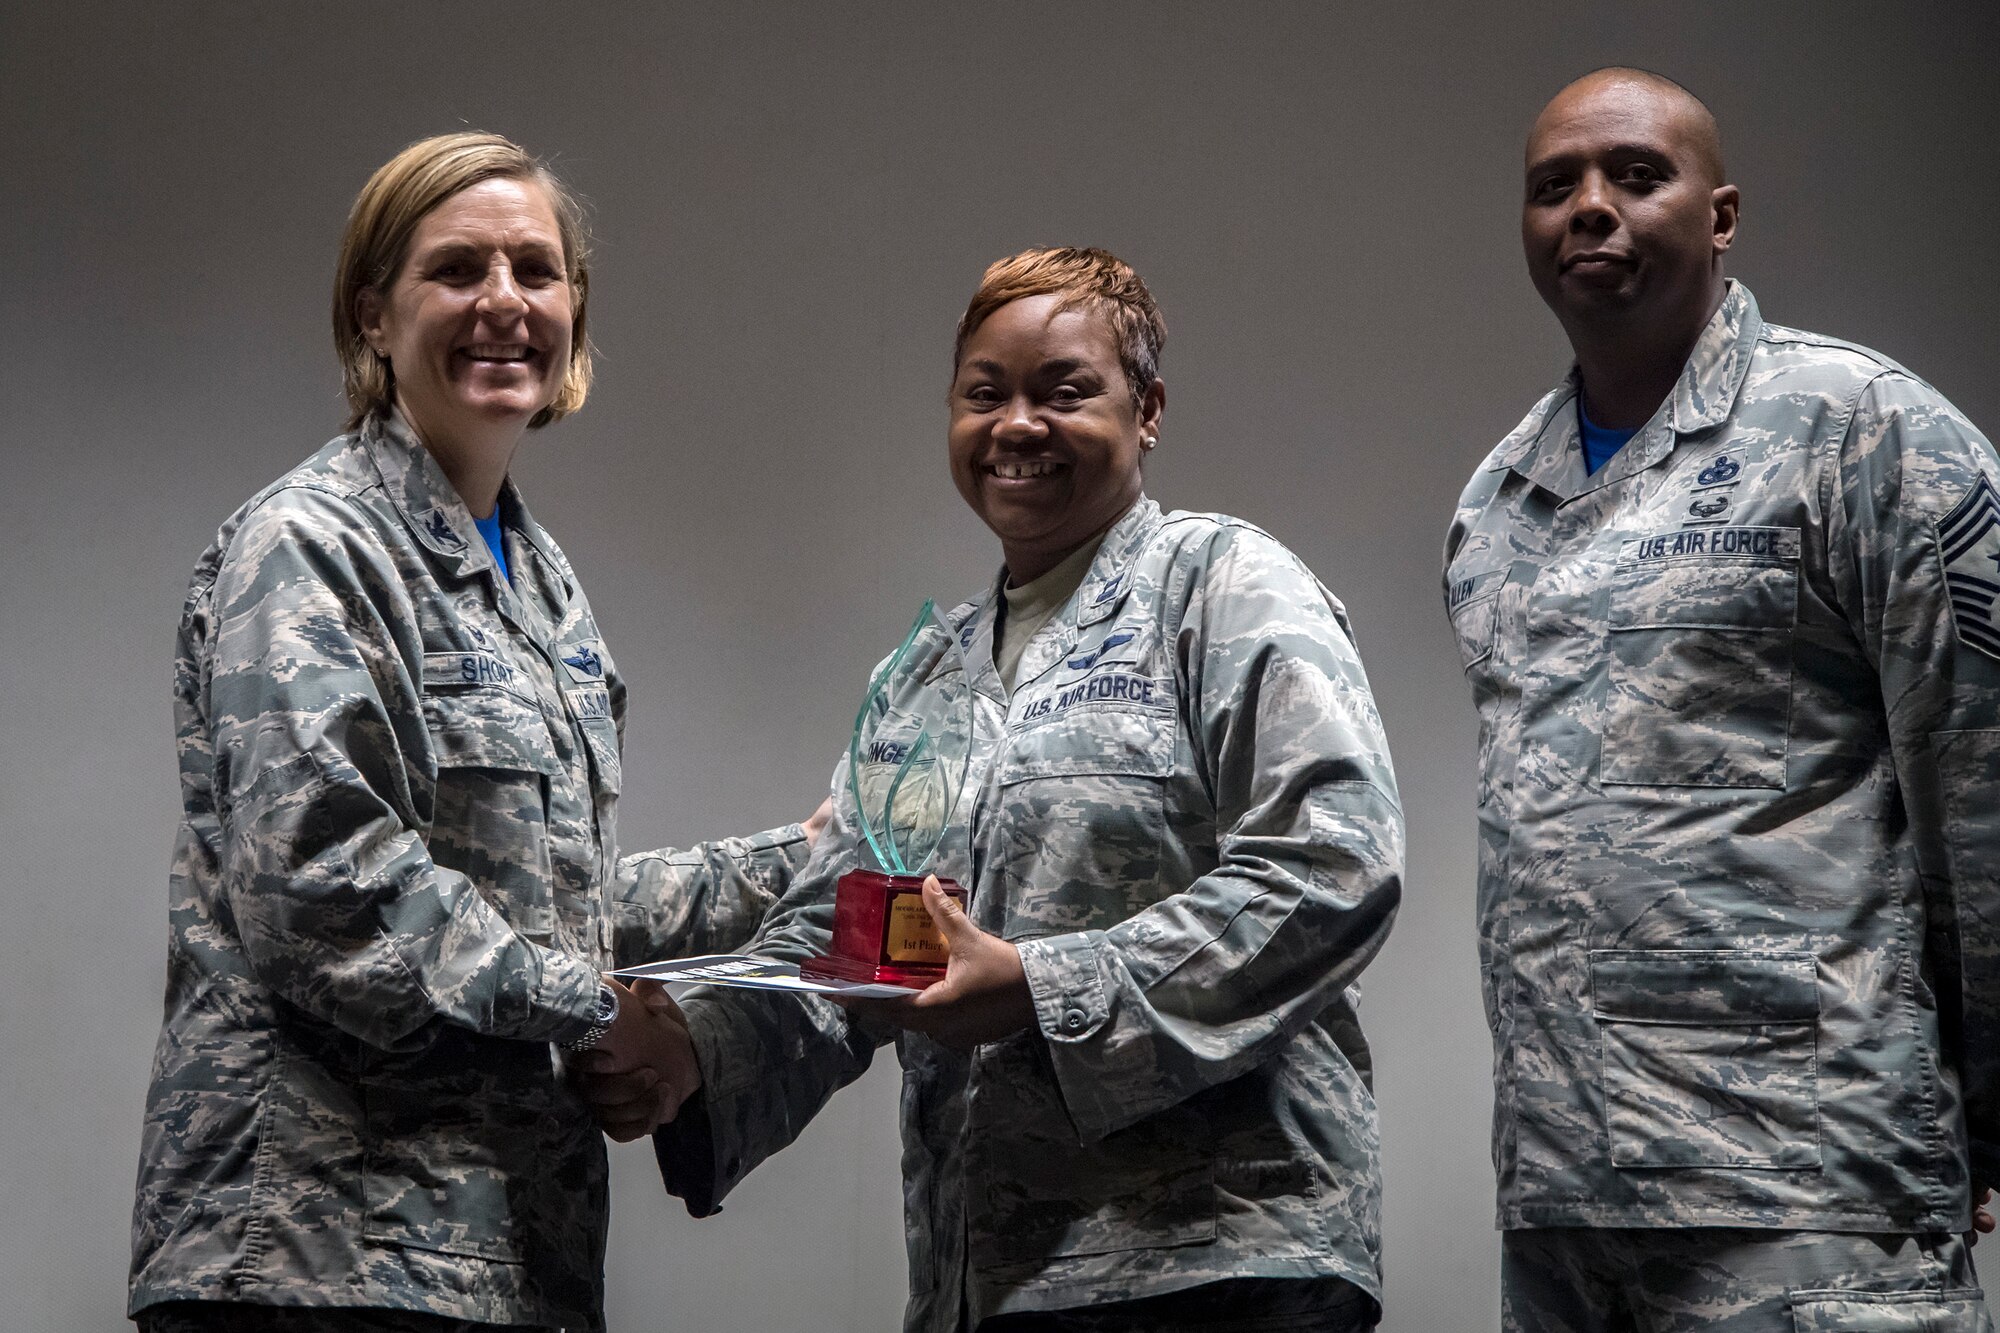 Col. Jennifer Short, left, 23d Wing (WG) commander, presents a 1st Place prize to Capt. Lakeatta Tonge, center, 23d Medical Group flight commander of education and training, following Spark Tank, June 15, 2018, at Moody Air Force Base, Ga. Spark Tank, a spinoff of the show Shark Tank, gave Airmen the opportunity to propose projects and improvements for Moody to leaders from the 23d WG and the local community. (U.S. Air Force photo by Airman 1st Class Eugene Oliver)